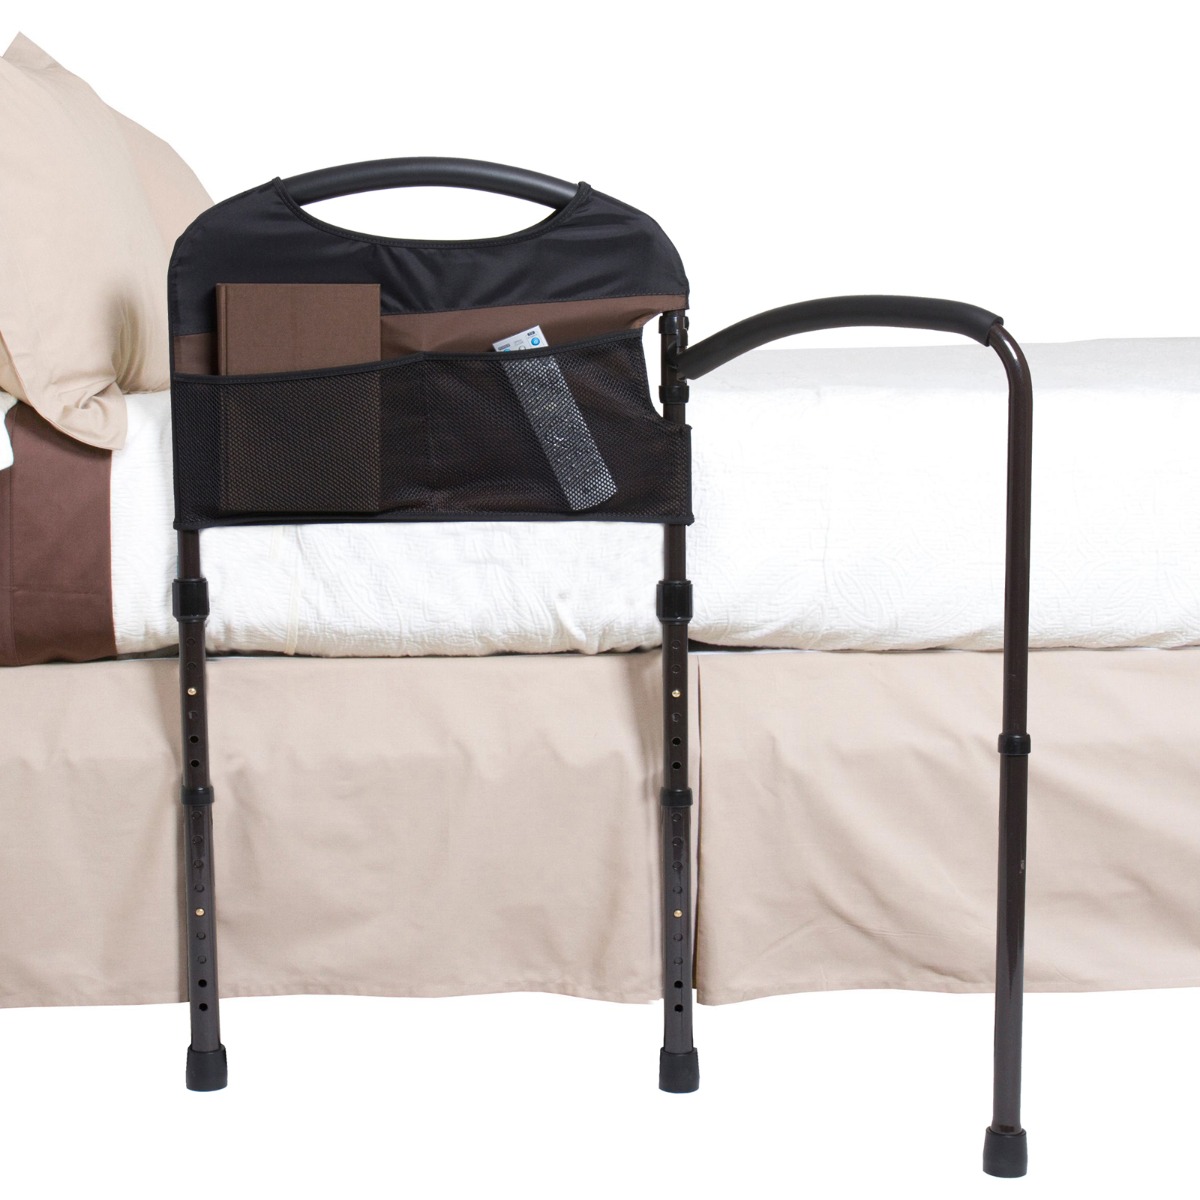 Mobility Bed Rail In use